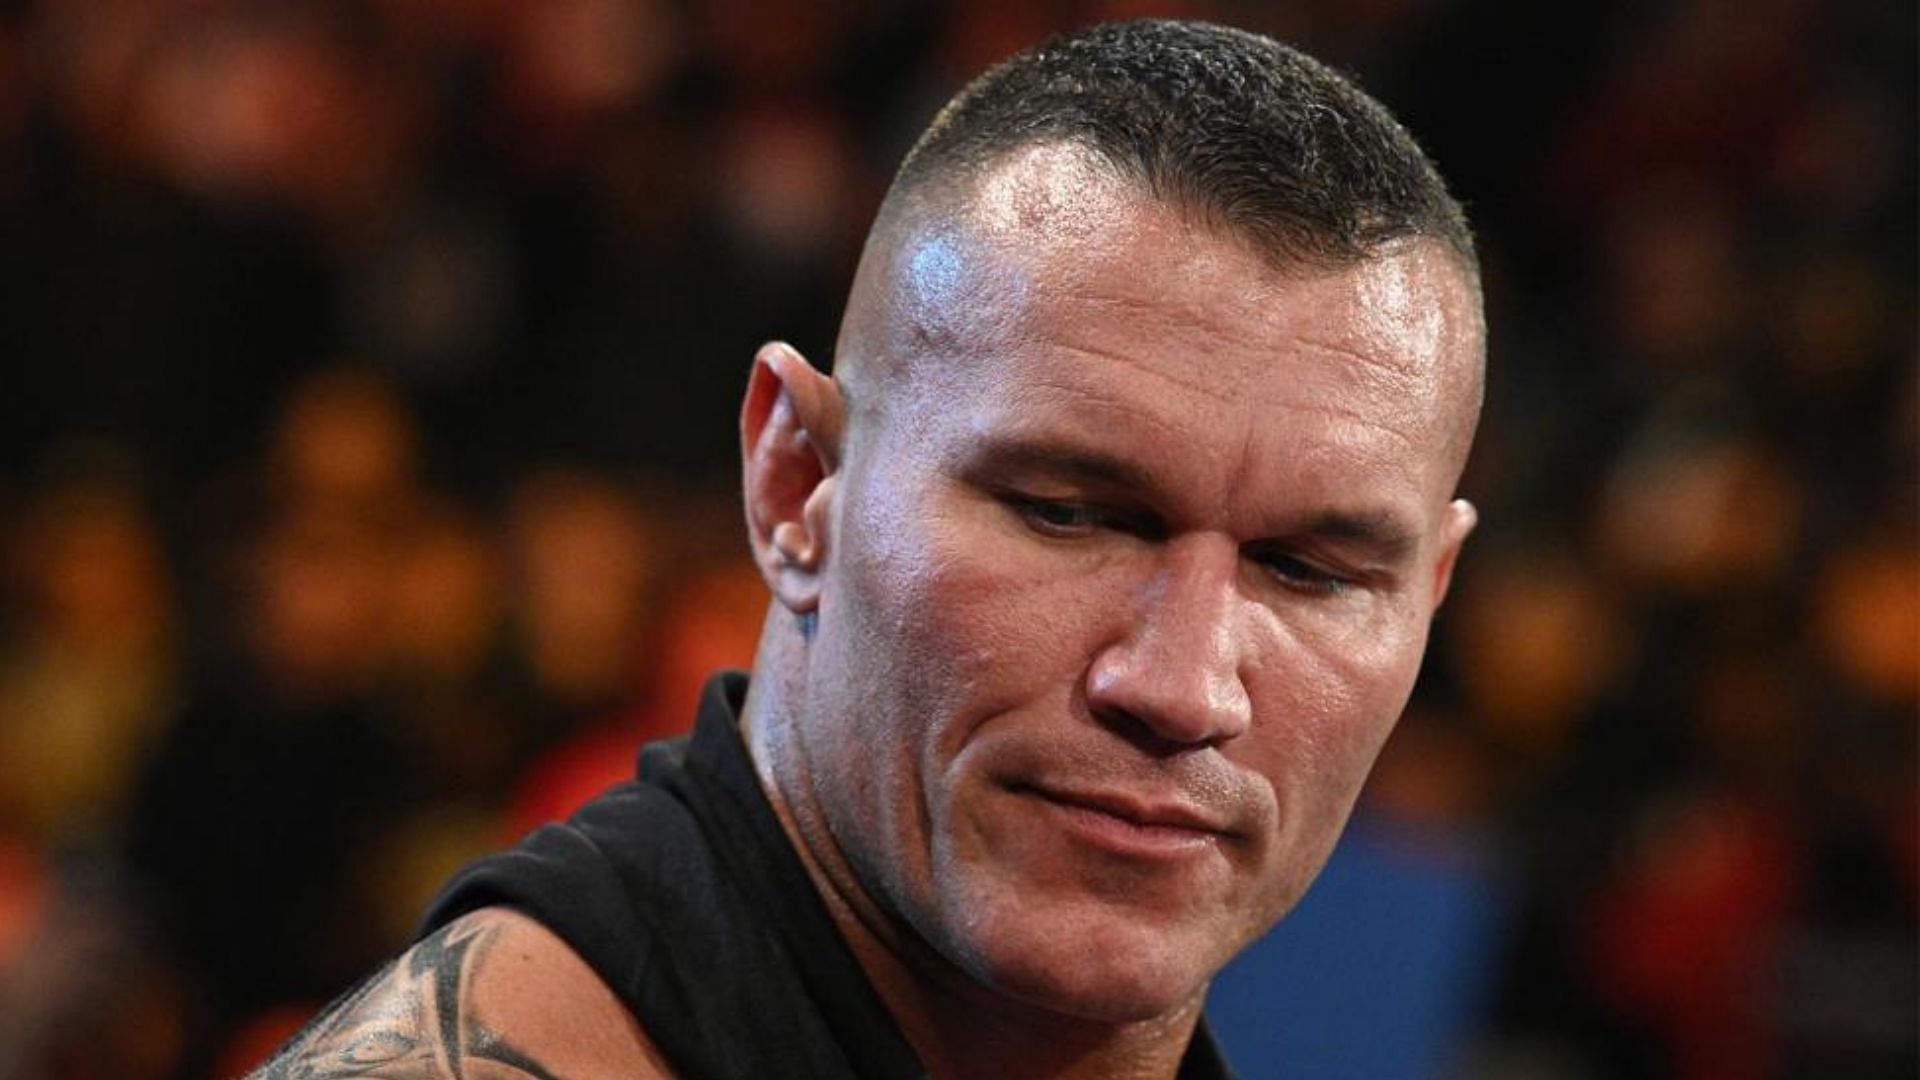 Randy Orton has been one of WWE&rsquo;s most prominent superstars since 2002